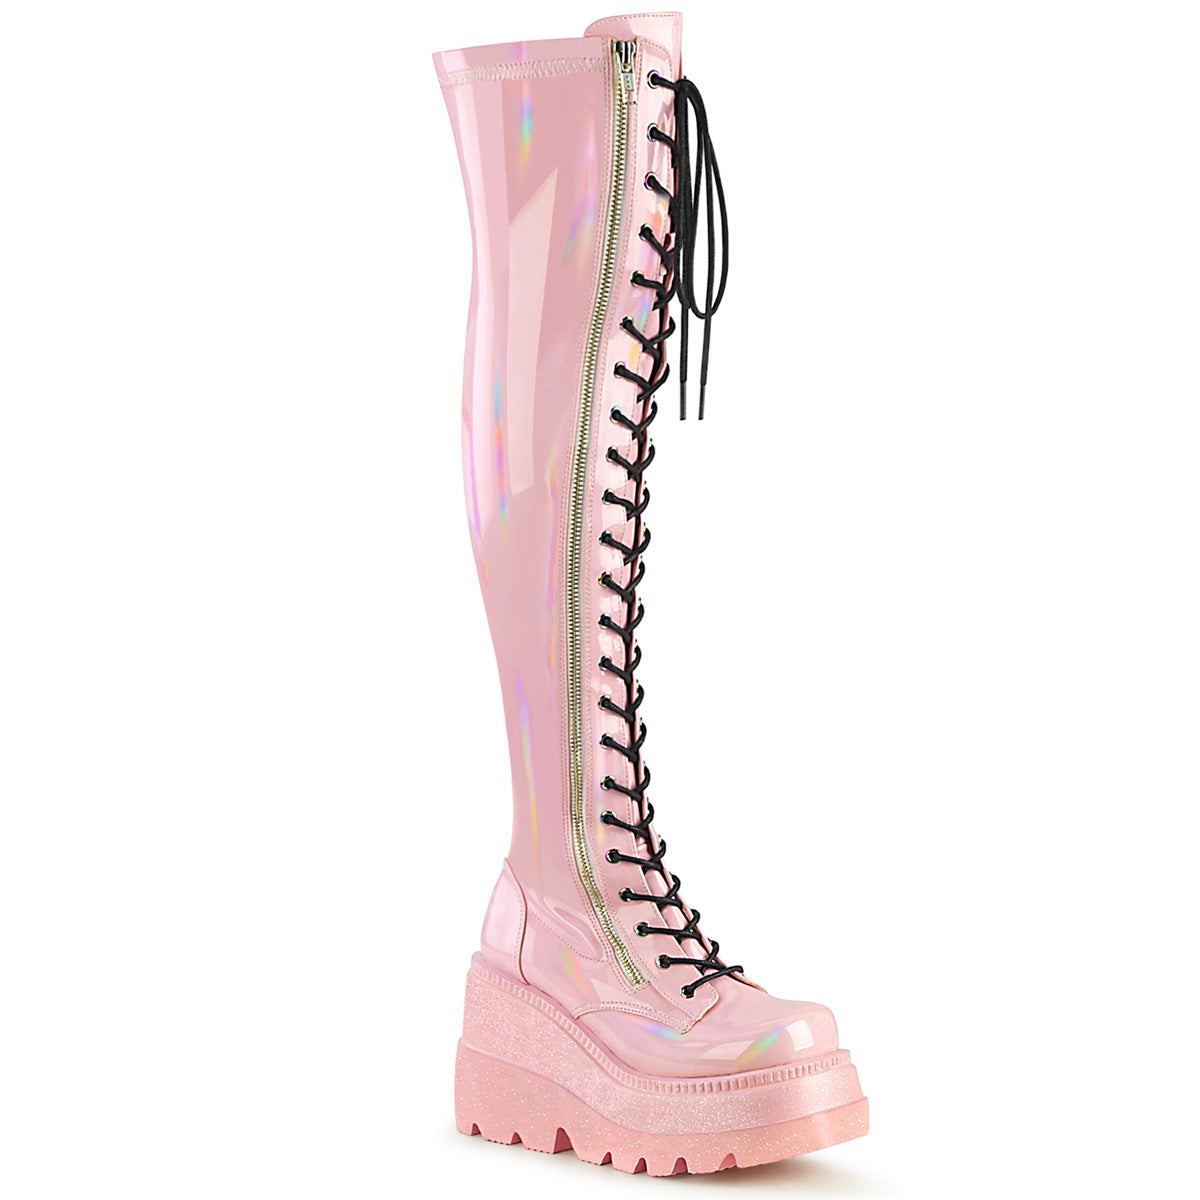 DemoniaCult Womens Boots SHAKER-374 B. Pink Hologram Stretch Patent